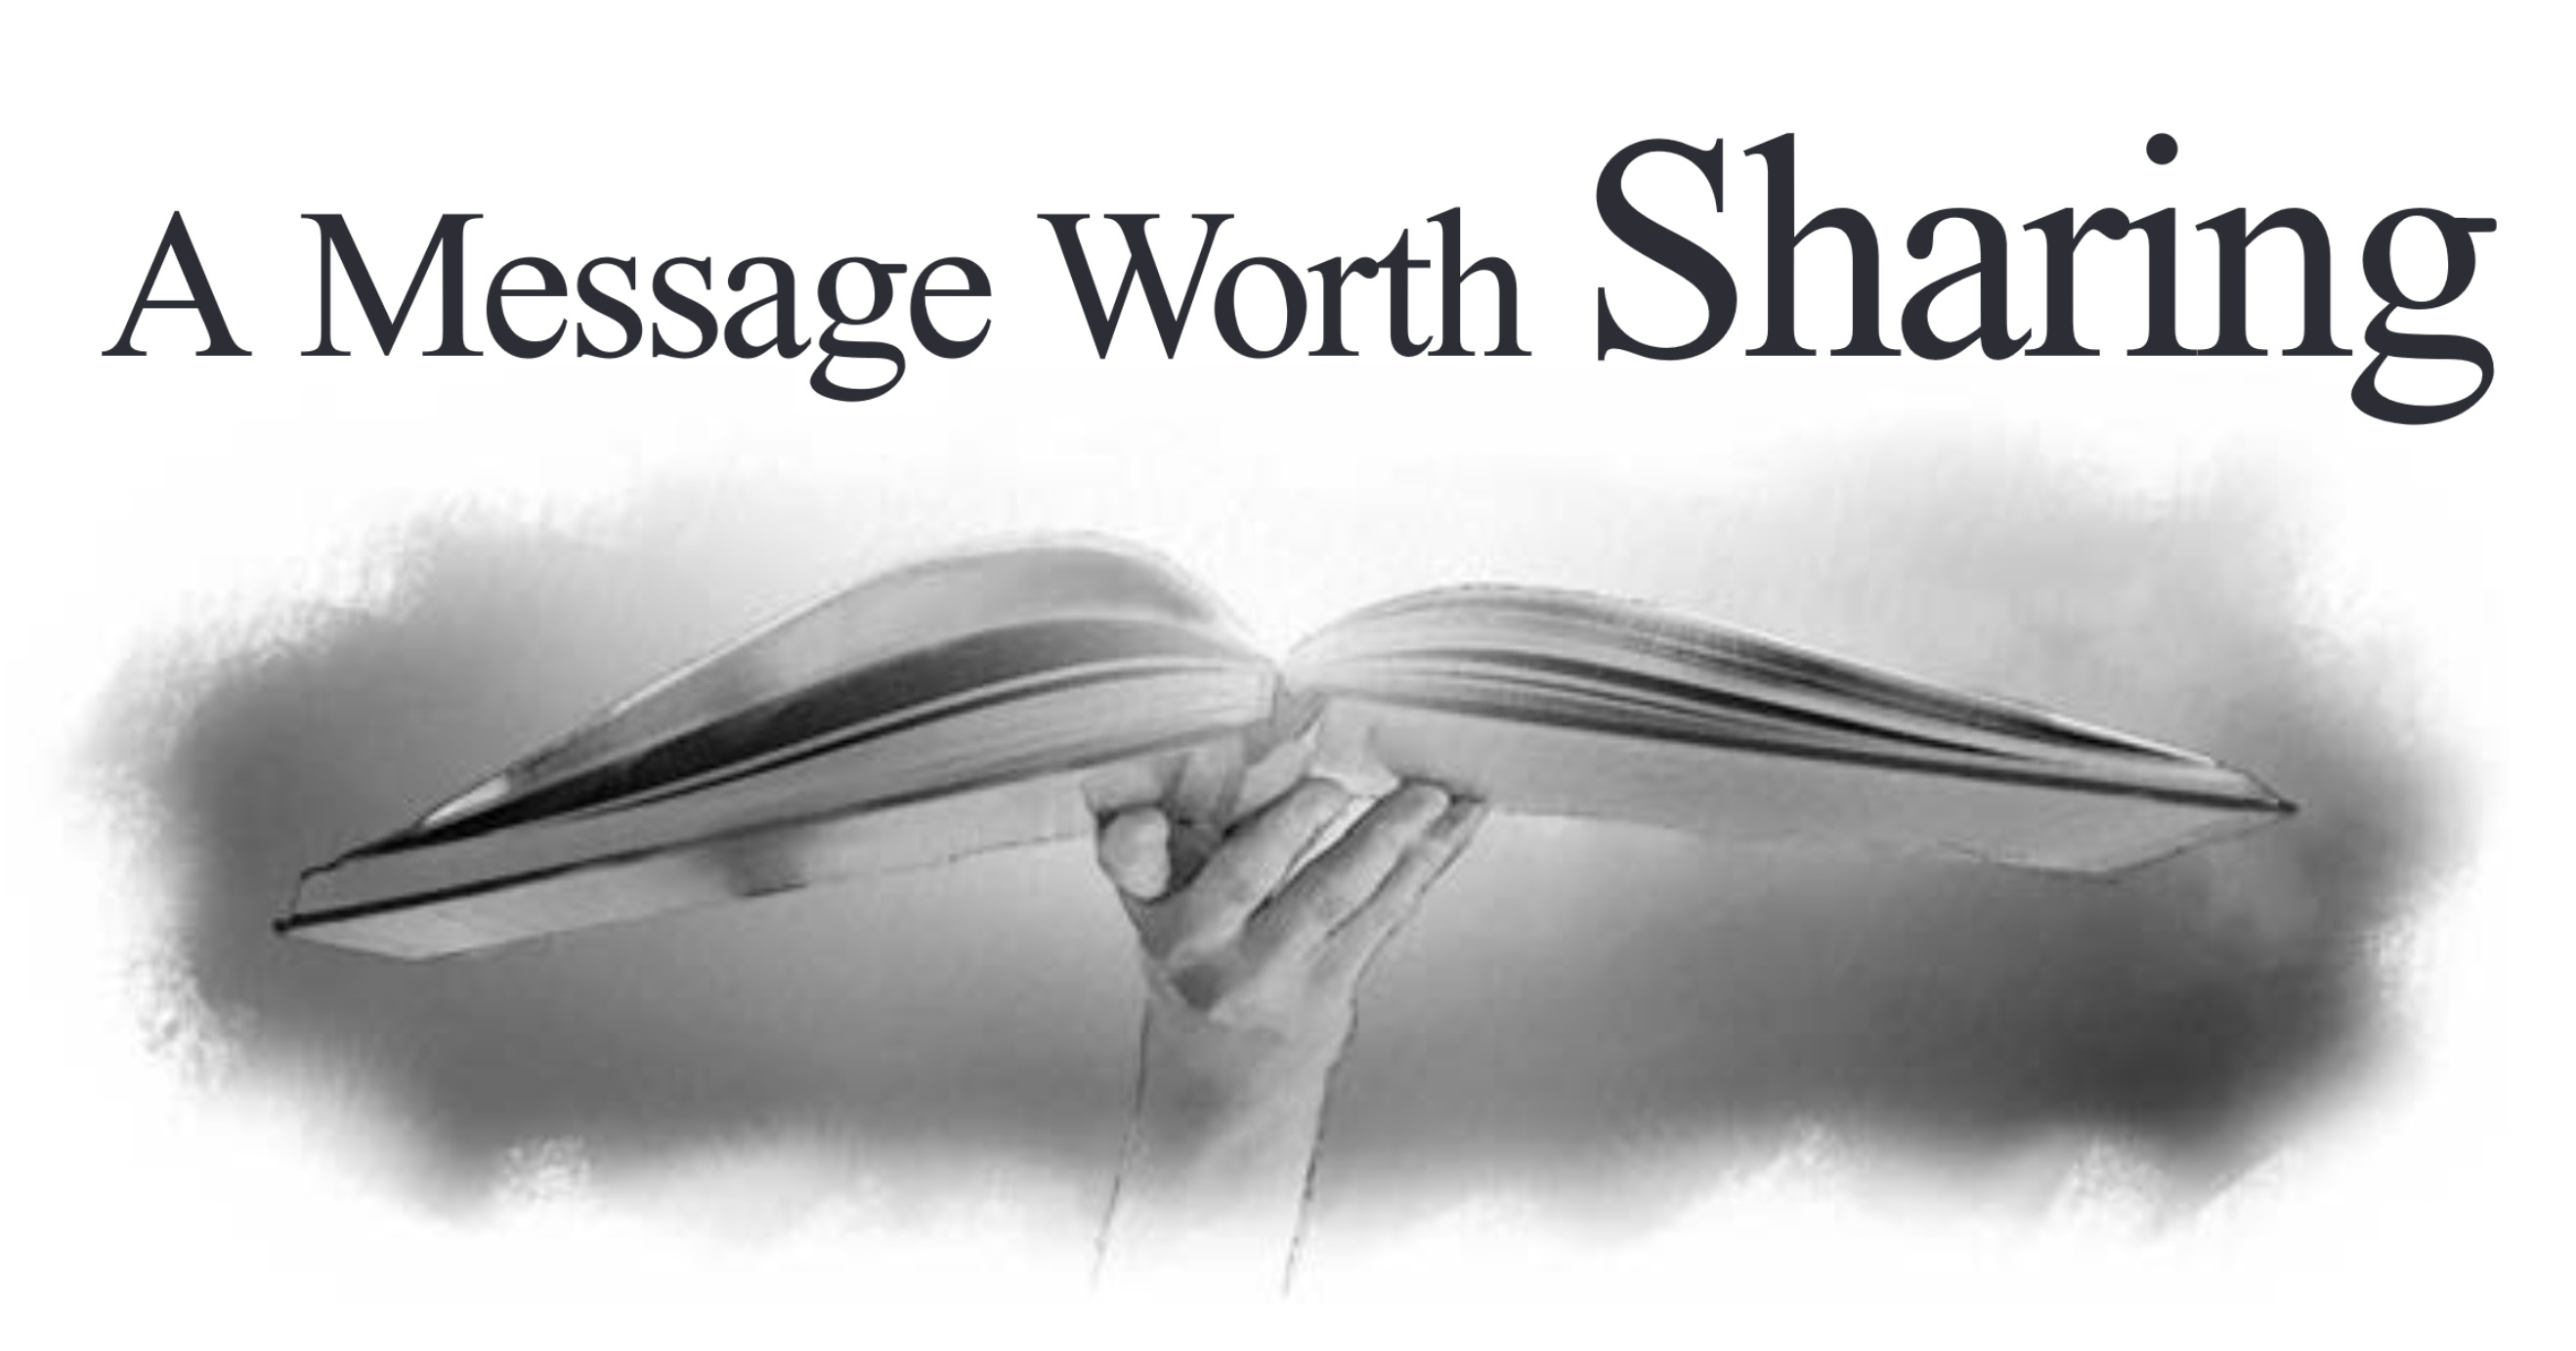 Lesson 12: A Message Worth Sharing (3rd Quarter 2020) - Sabbath School Weekly Lesson. Weekly lesson for in-depth Bible study of Word of God.